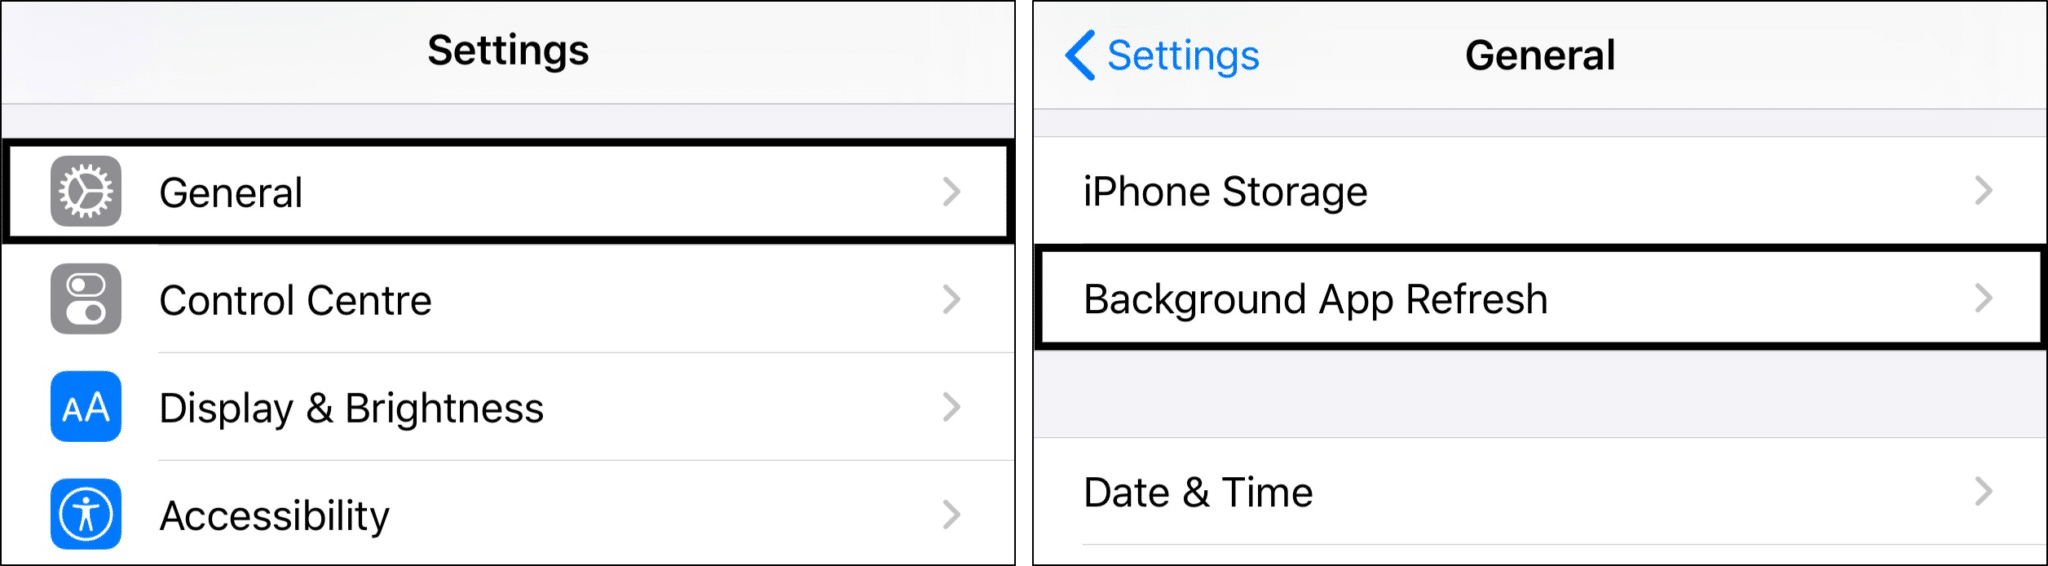 Enable background app refresh to fix Whatsapp calls not ringing when iPhone is locked